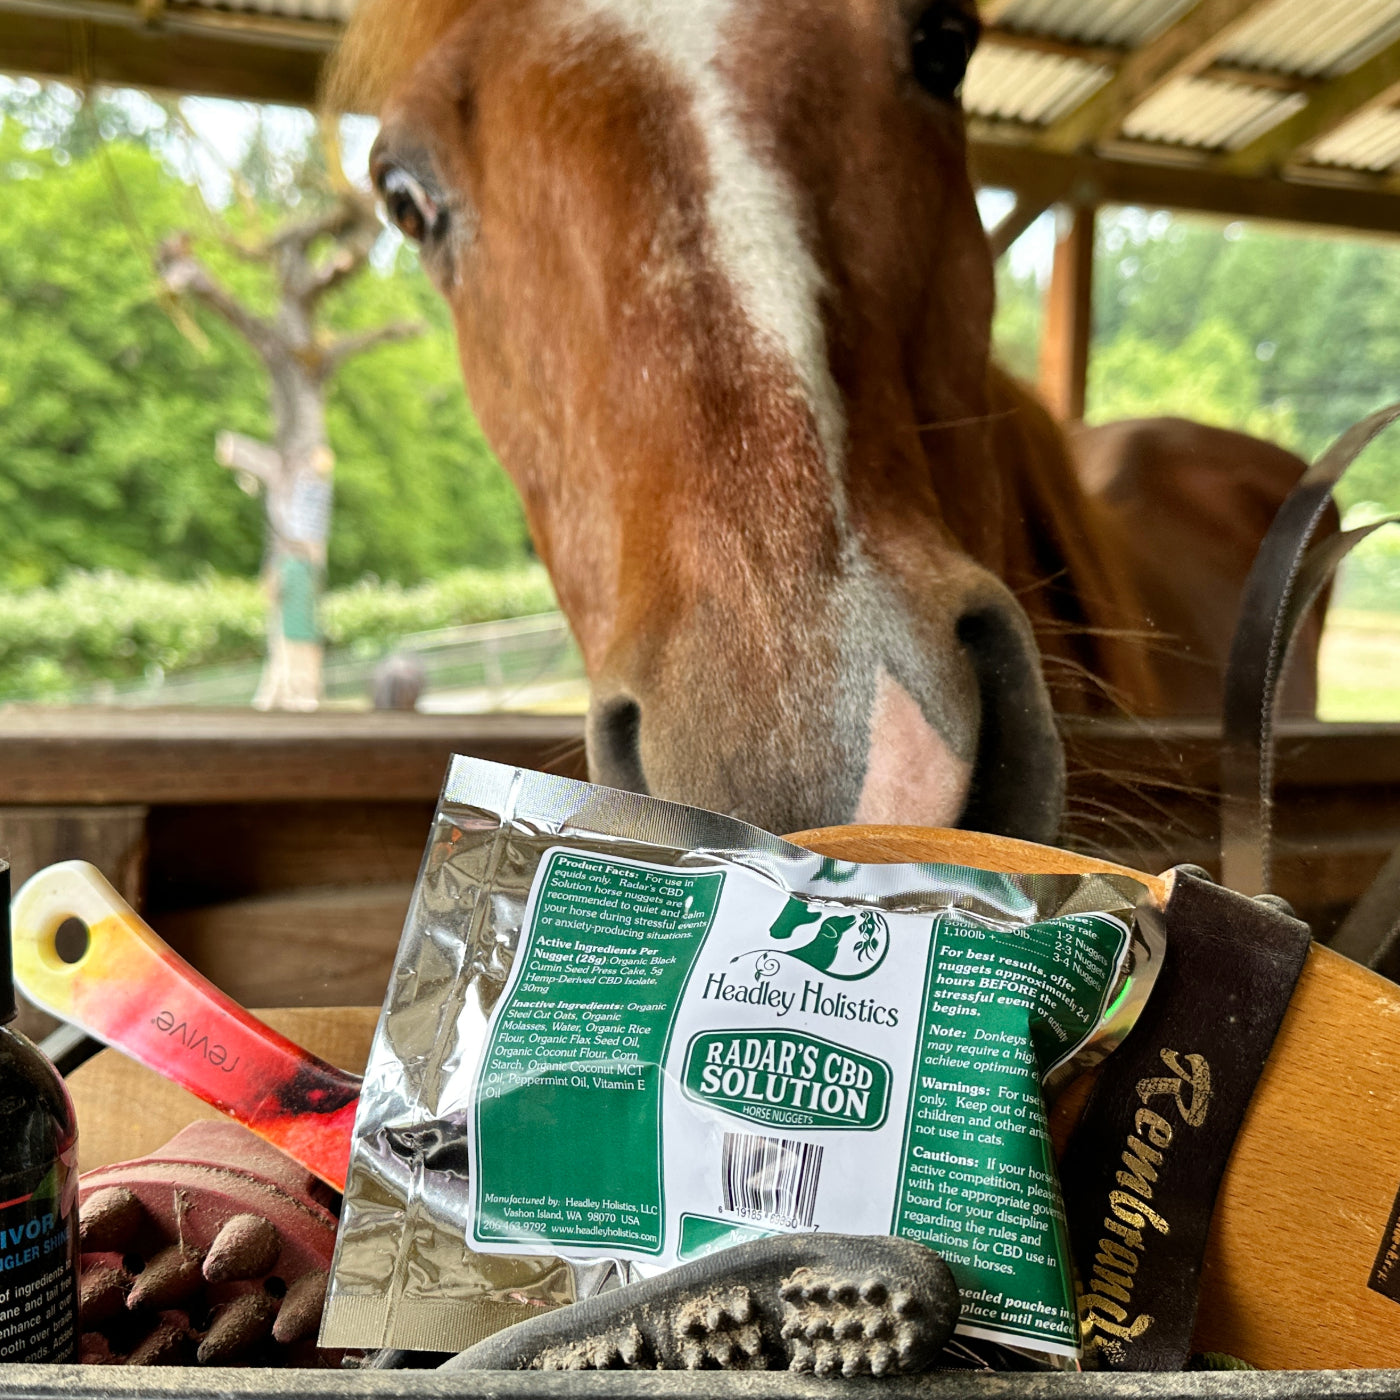 Elite Calming nuggets for horses is the best calming horse supplement on the market. Organic, human-grade and natural